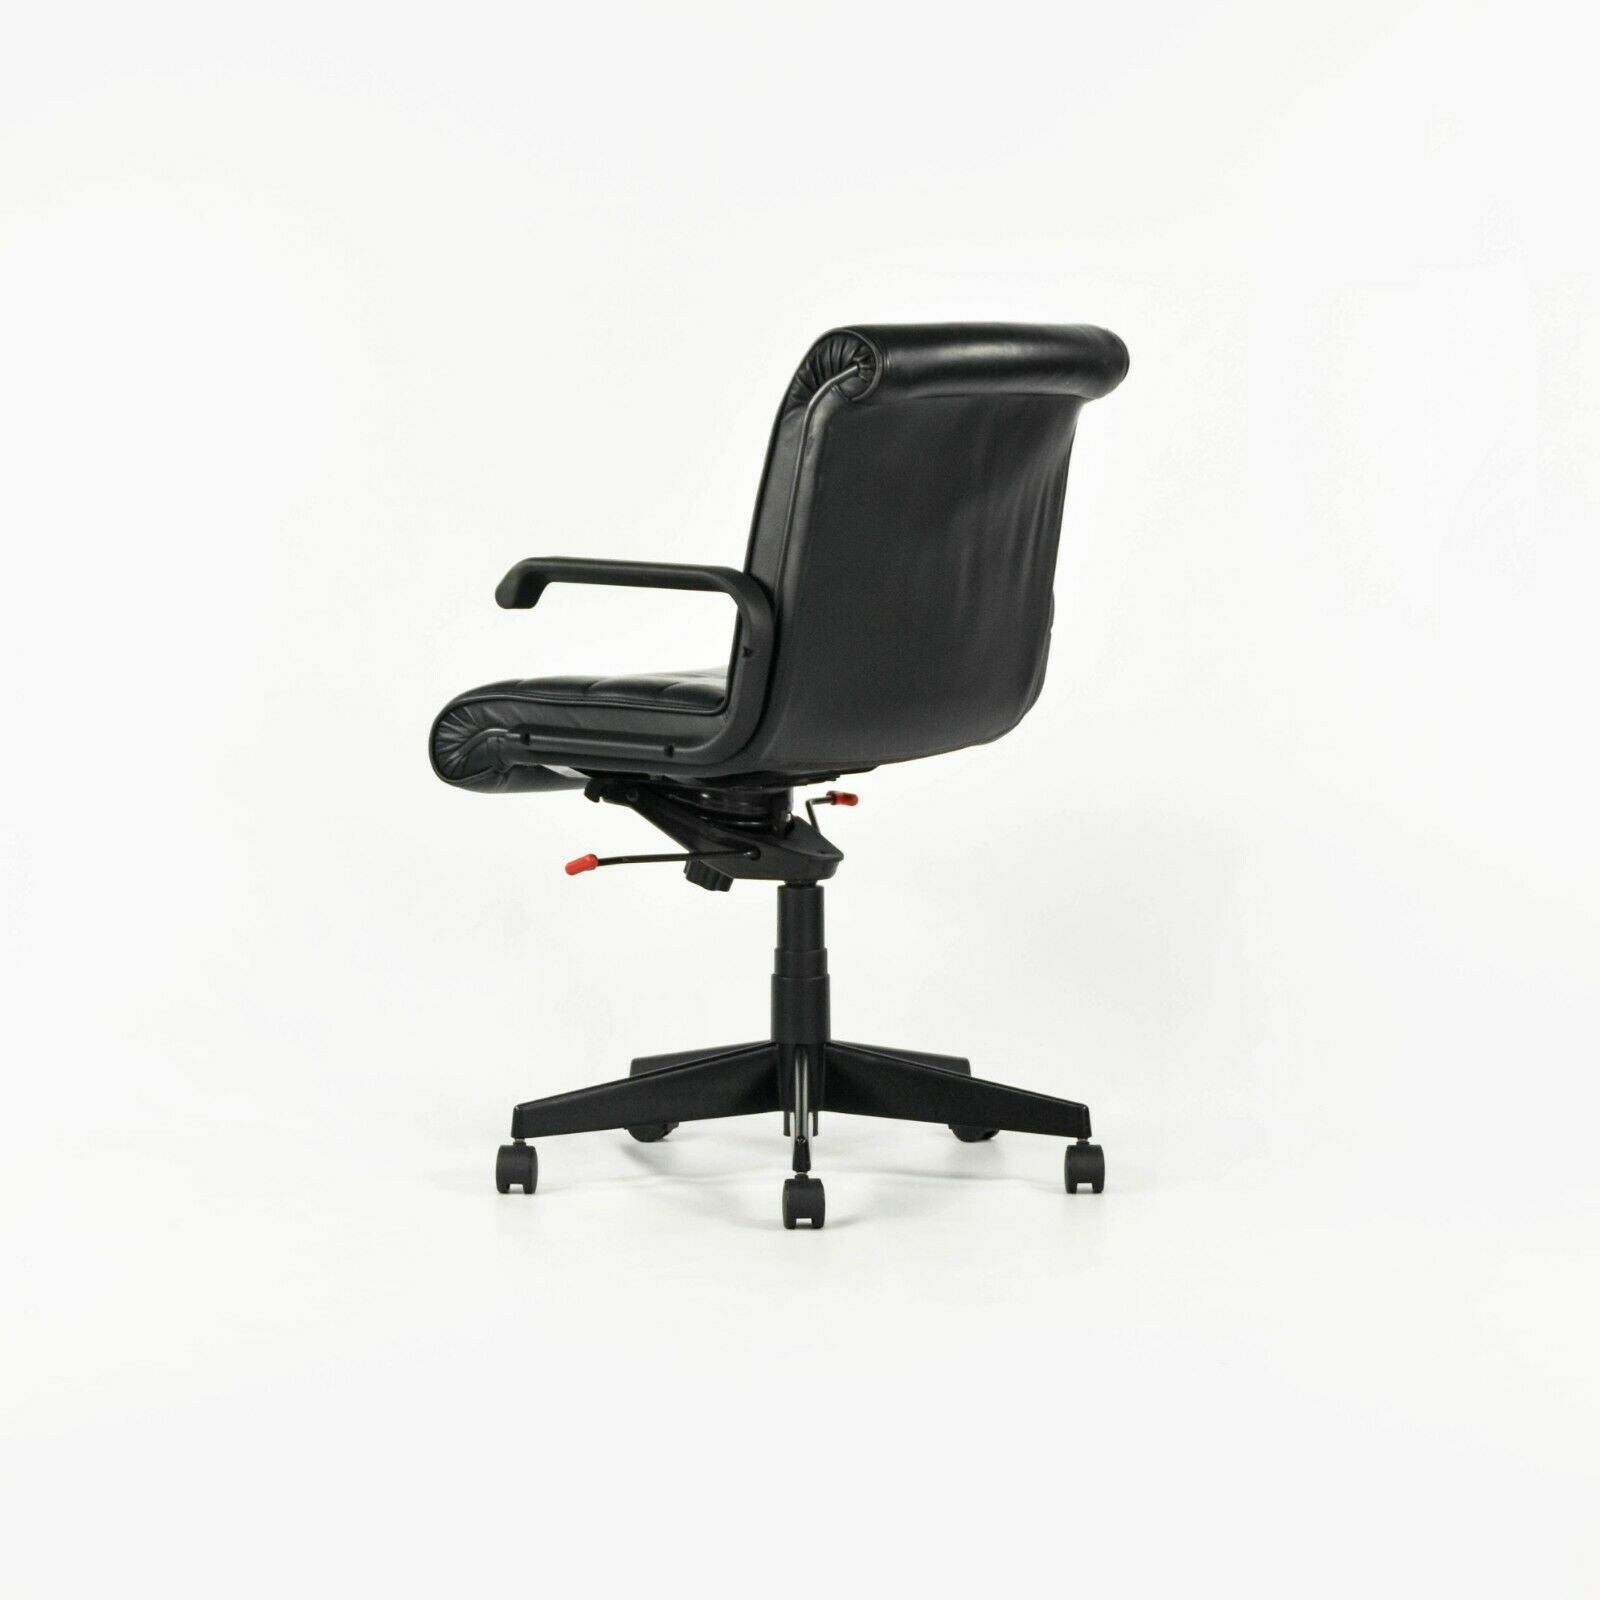 SOLD 2006 Richard Sapper for Knoll Management Desk Chair in Black Toscana Leather